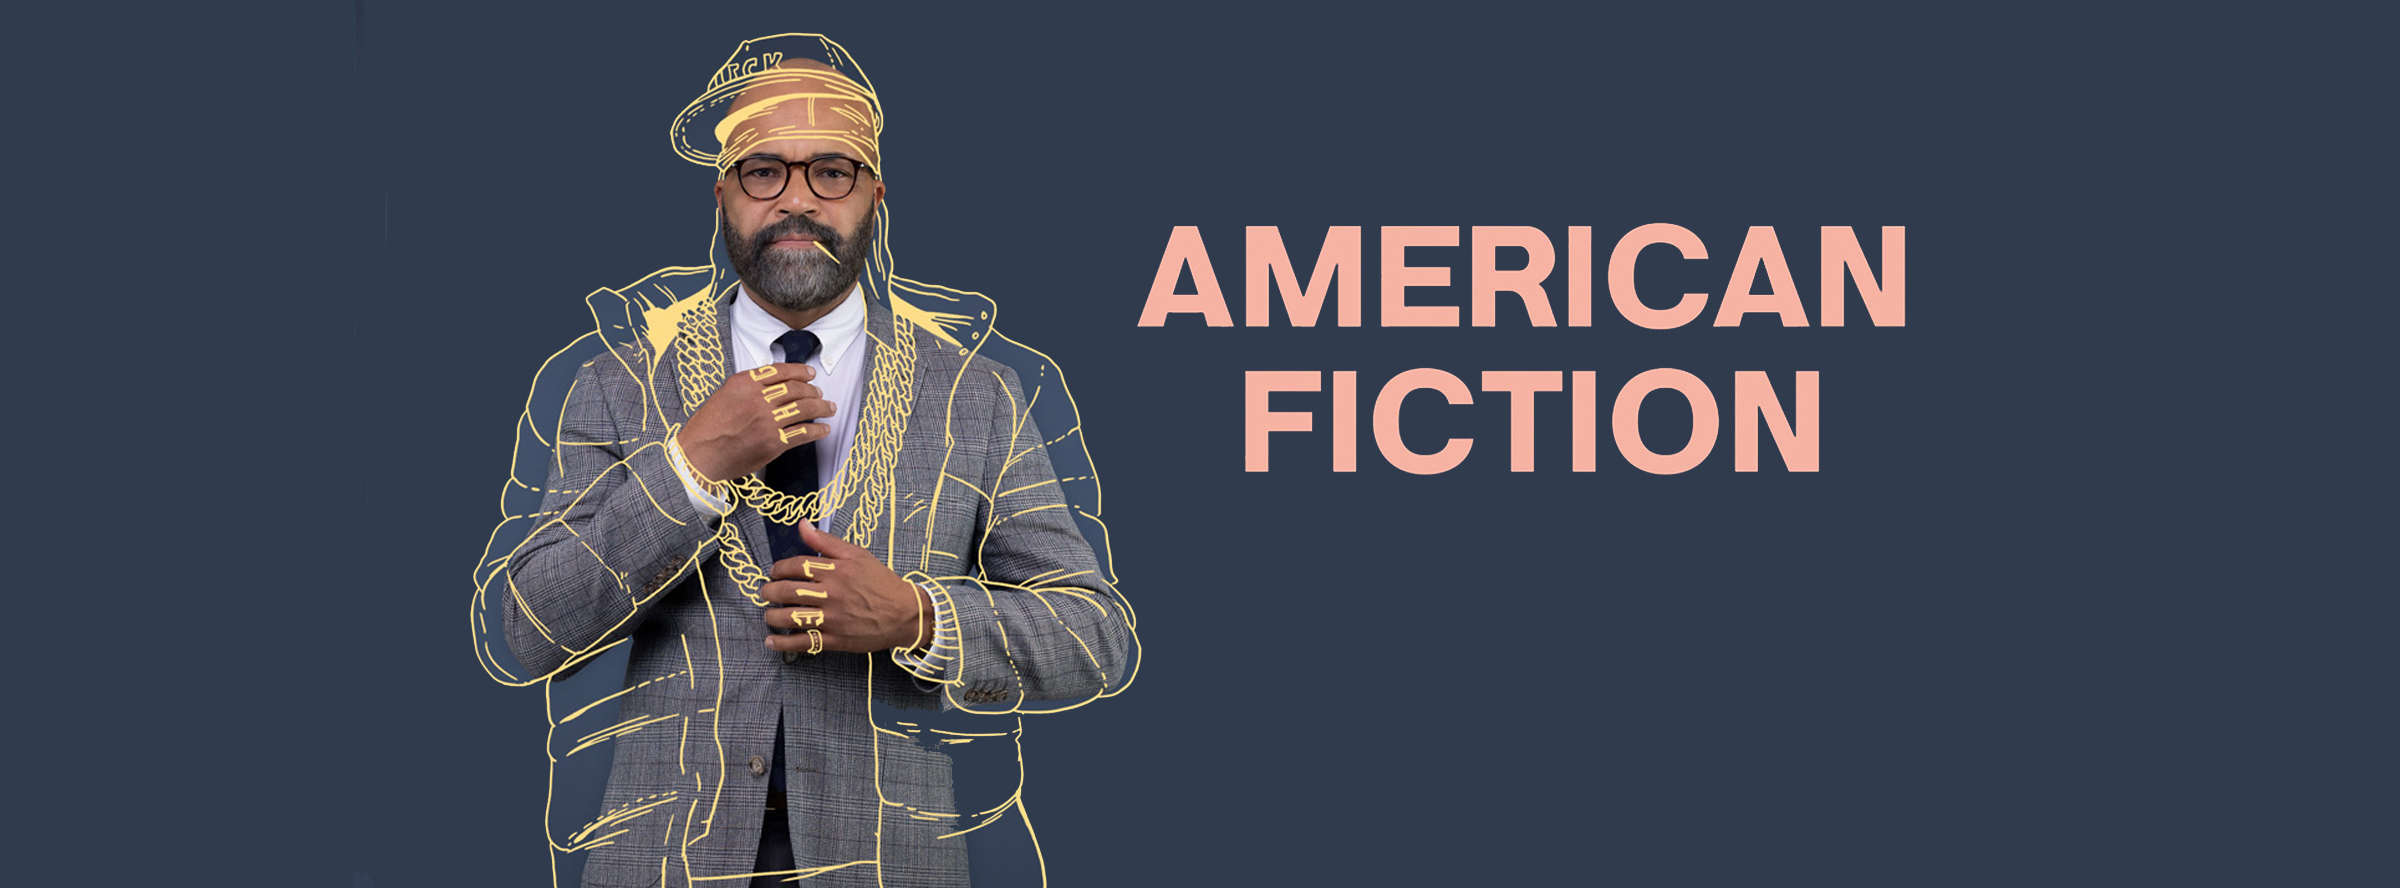 banner for american fiction